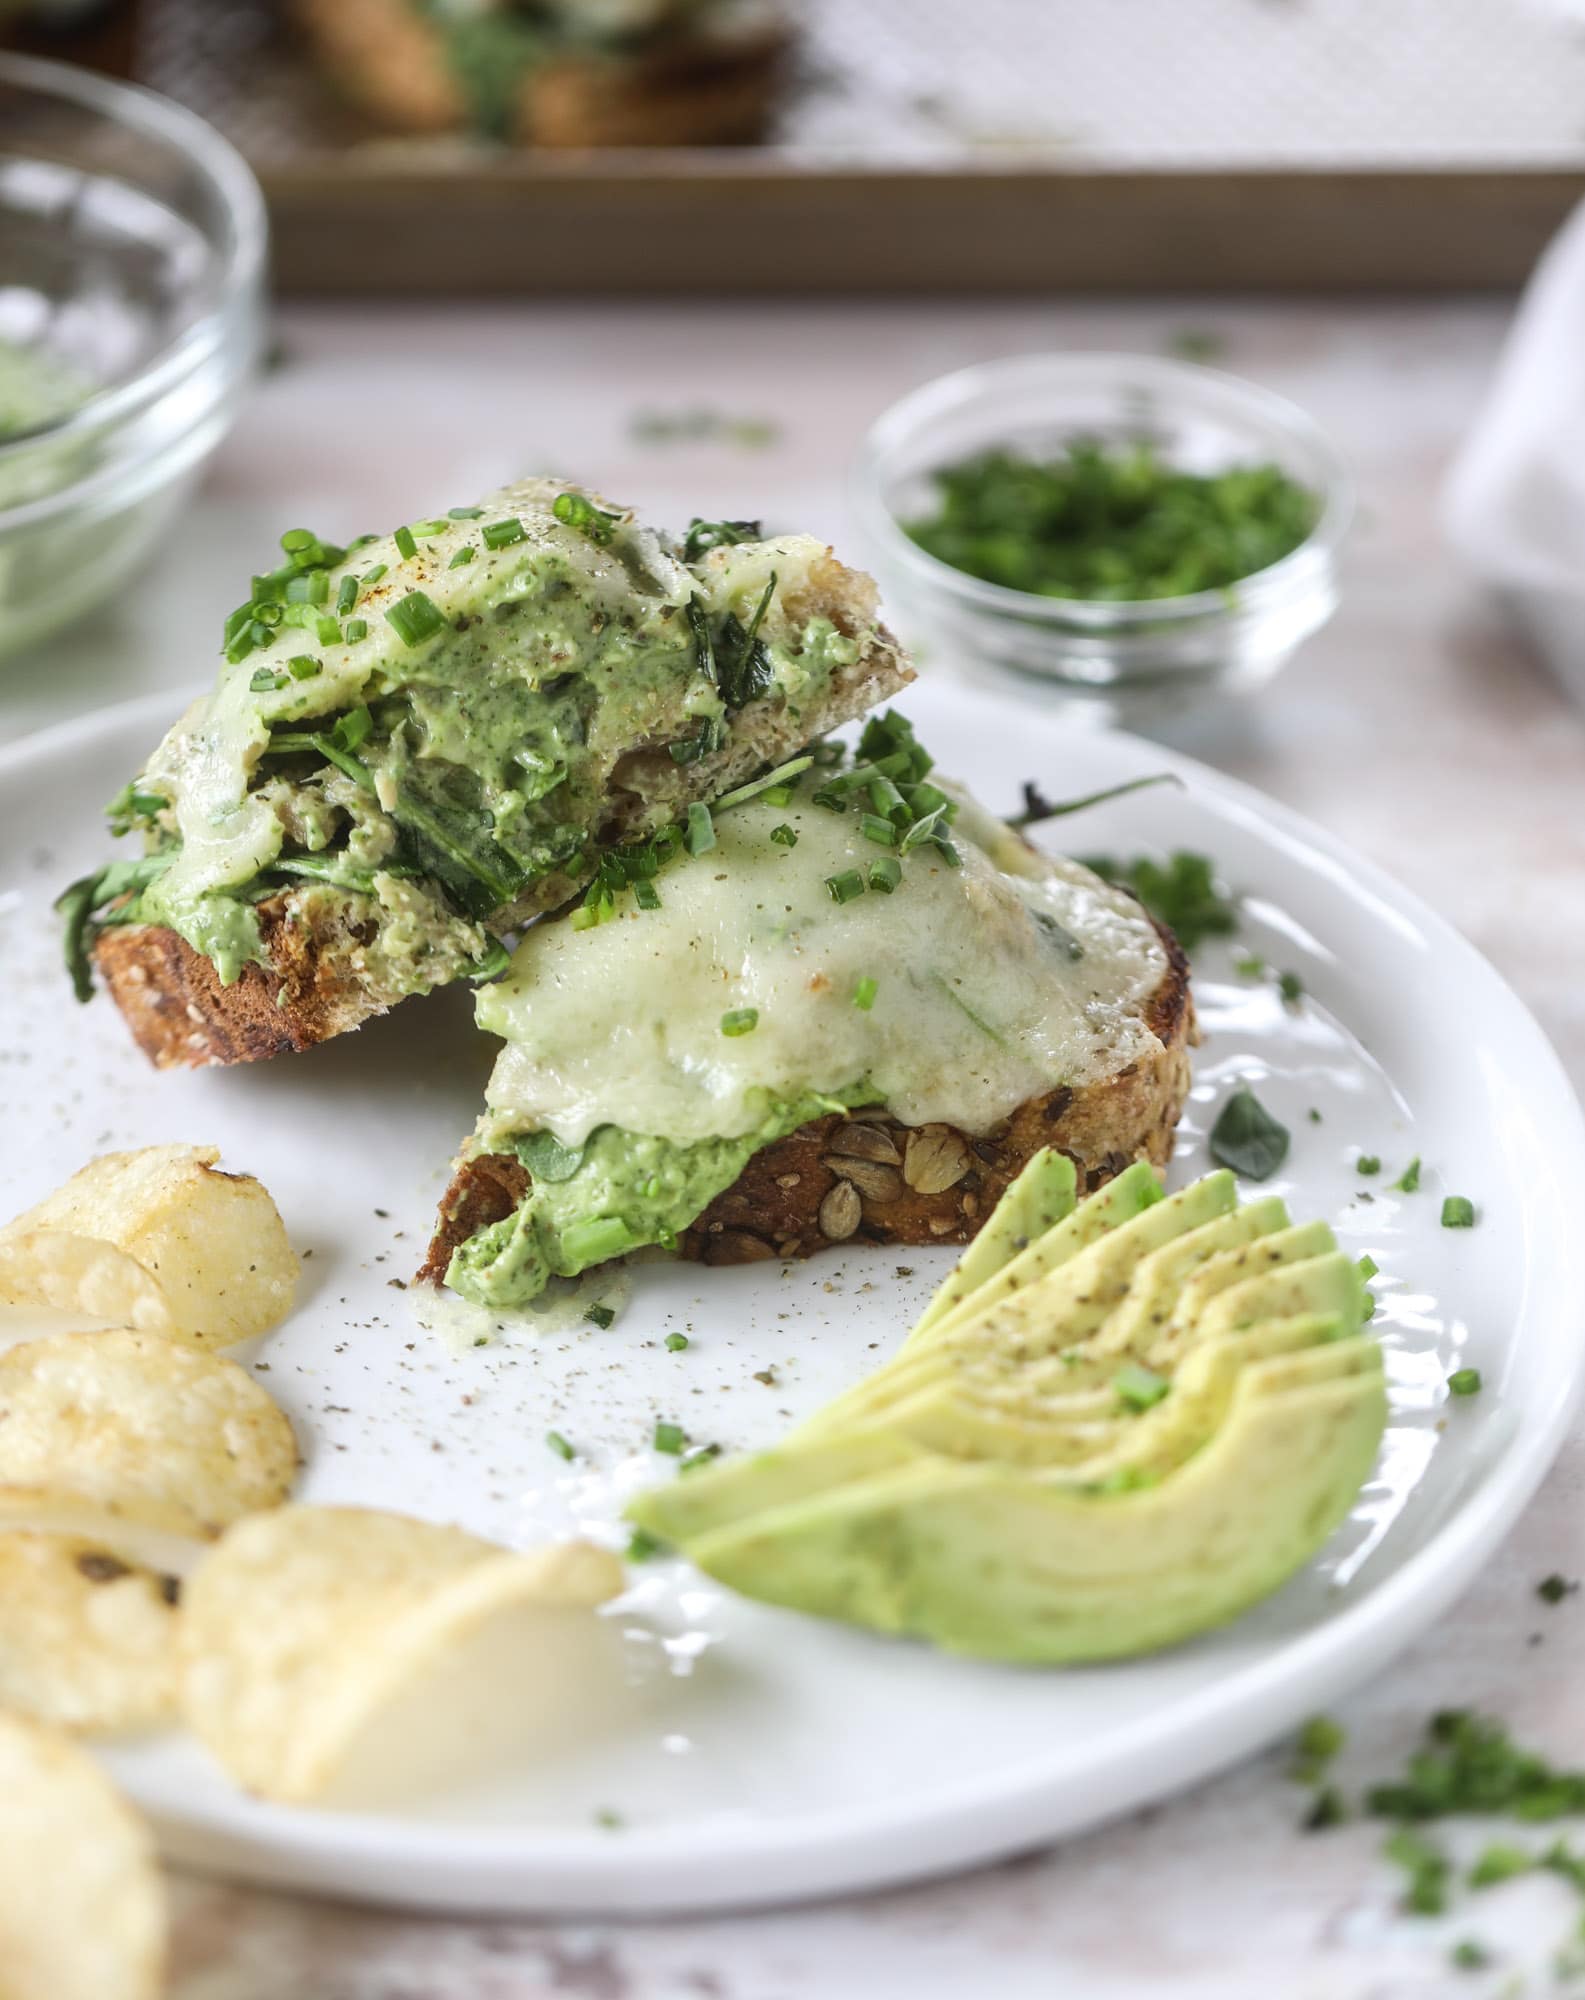 These green green tuna melt tartines are a lunch dream come true! The green goddess dressing is full of avocado, greek yogurt, spinach and fresh herbs. Paired with the tuna, whole grain toast and melty cheese, it's incredibly delicious and a super easy lunch! I howsweeteats.com #green #goddess #tune #salad #melts